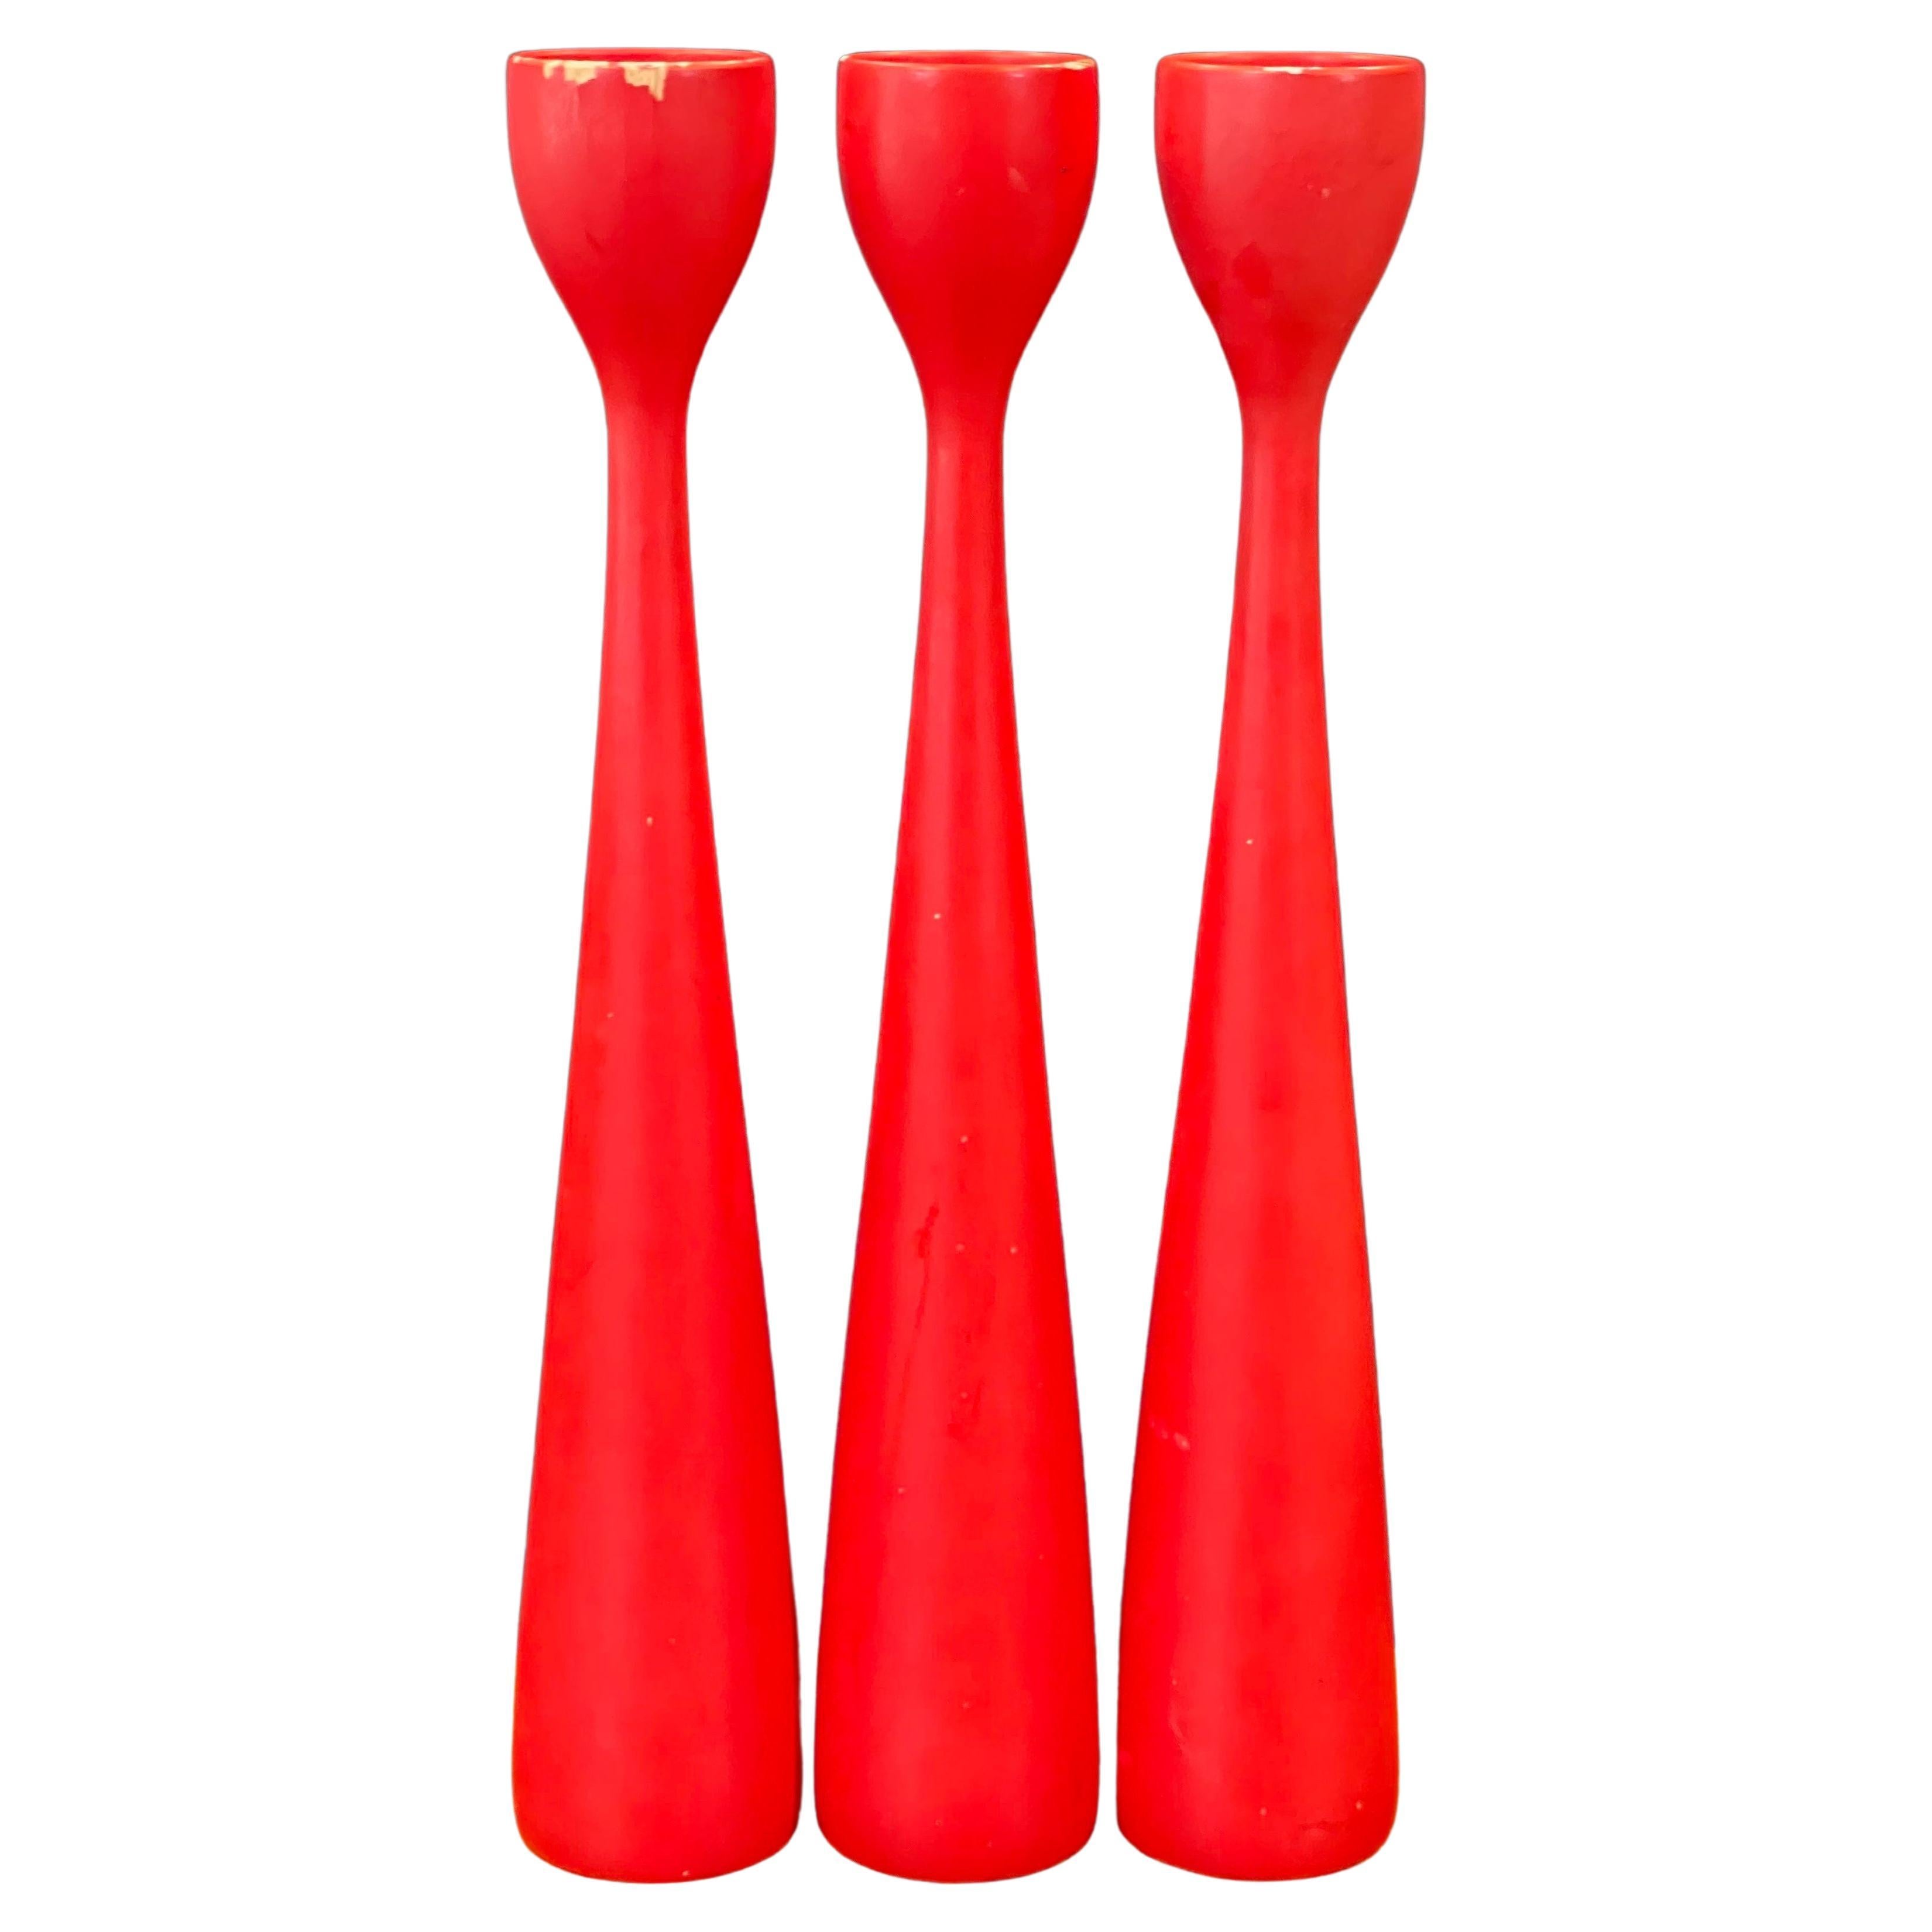 A nice set of three MCM red hardwood candlesticks by Illums Boulghus of Denmark, circa 1960s. The set has a great well worn look (some chips just add to the character) and each stick measures 2